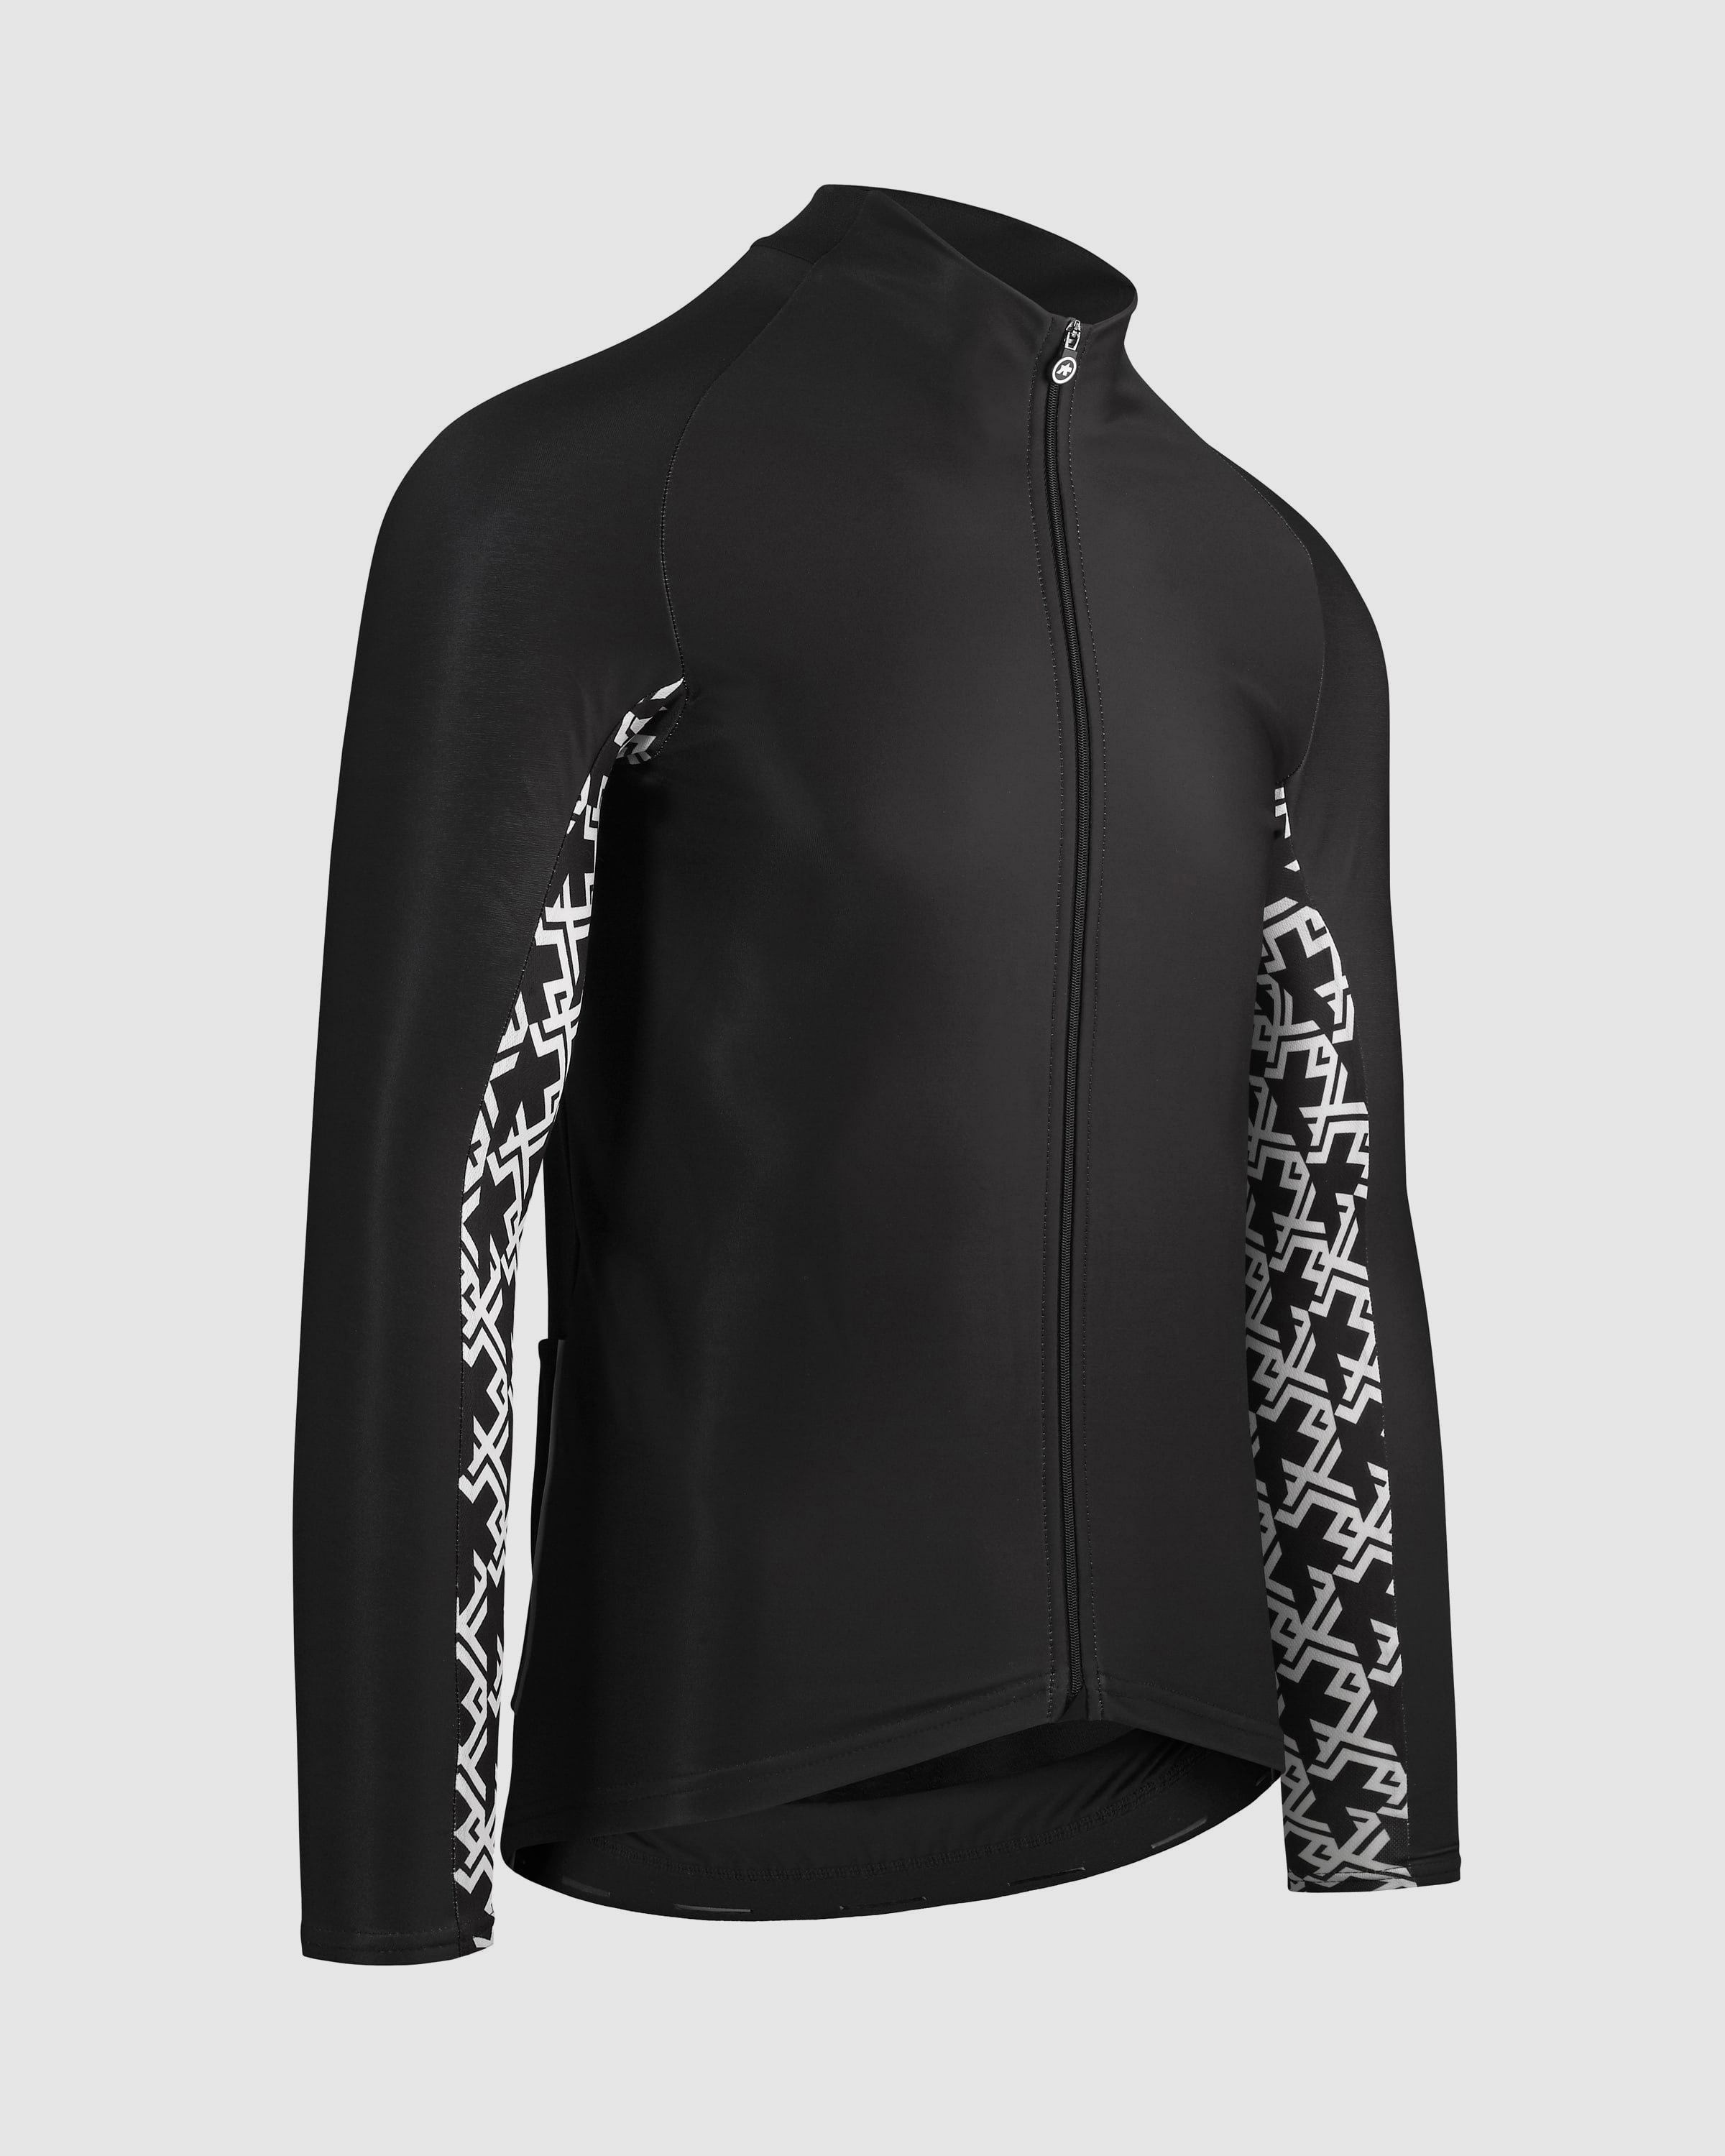 MILLE GT Spring Fall LS Jersey - ASSOS Of Switzerland - Official Outlet